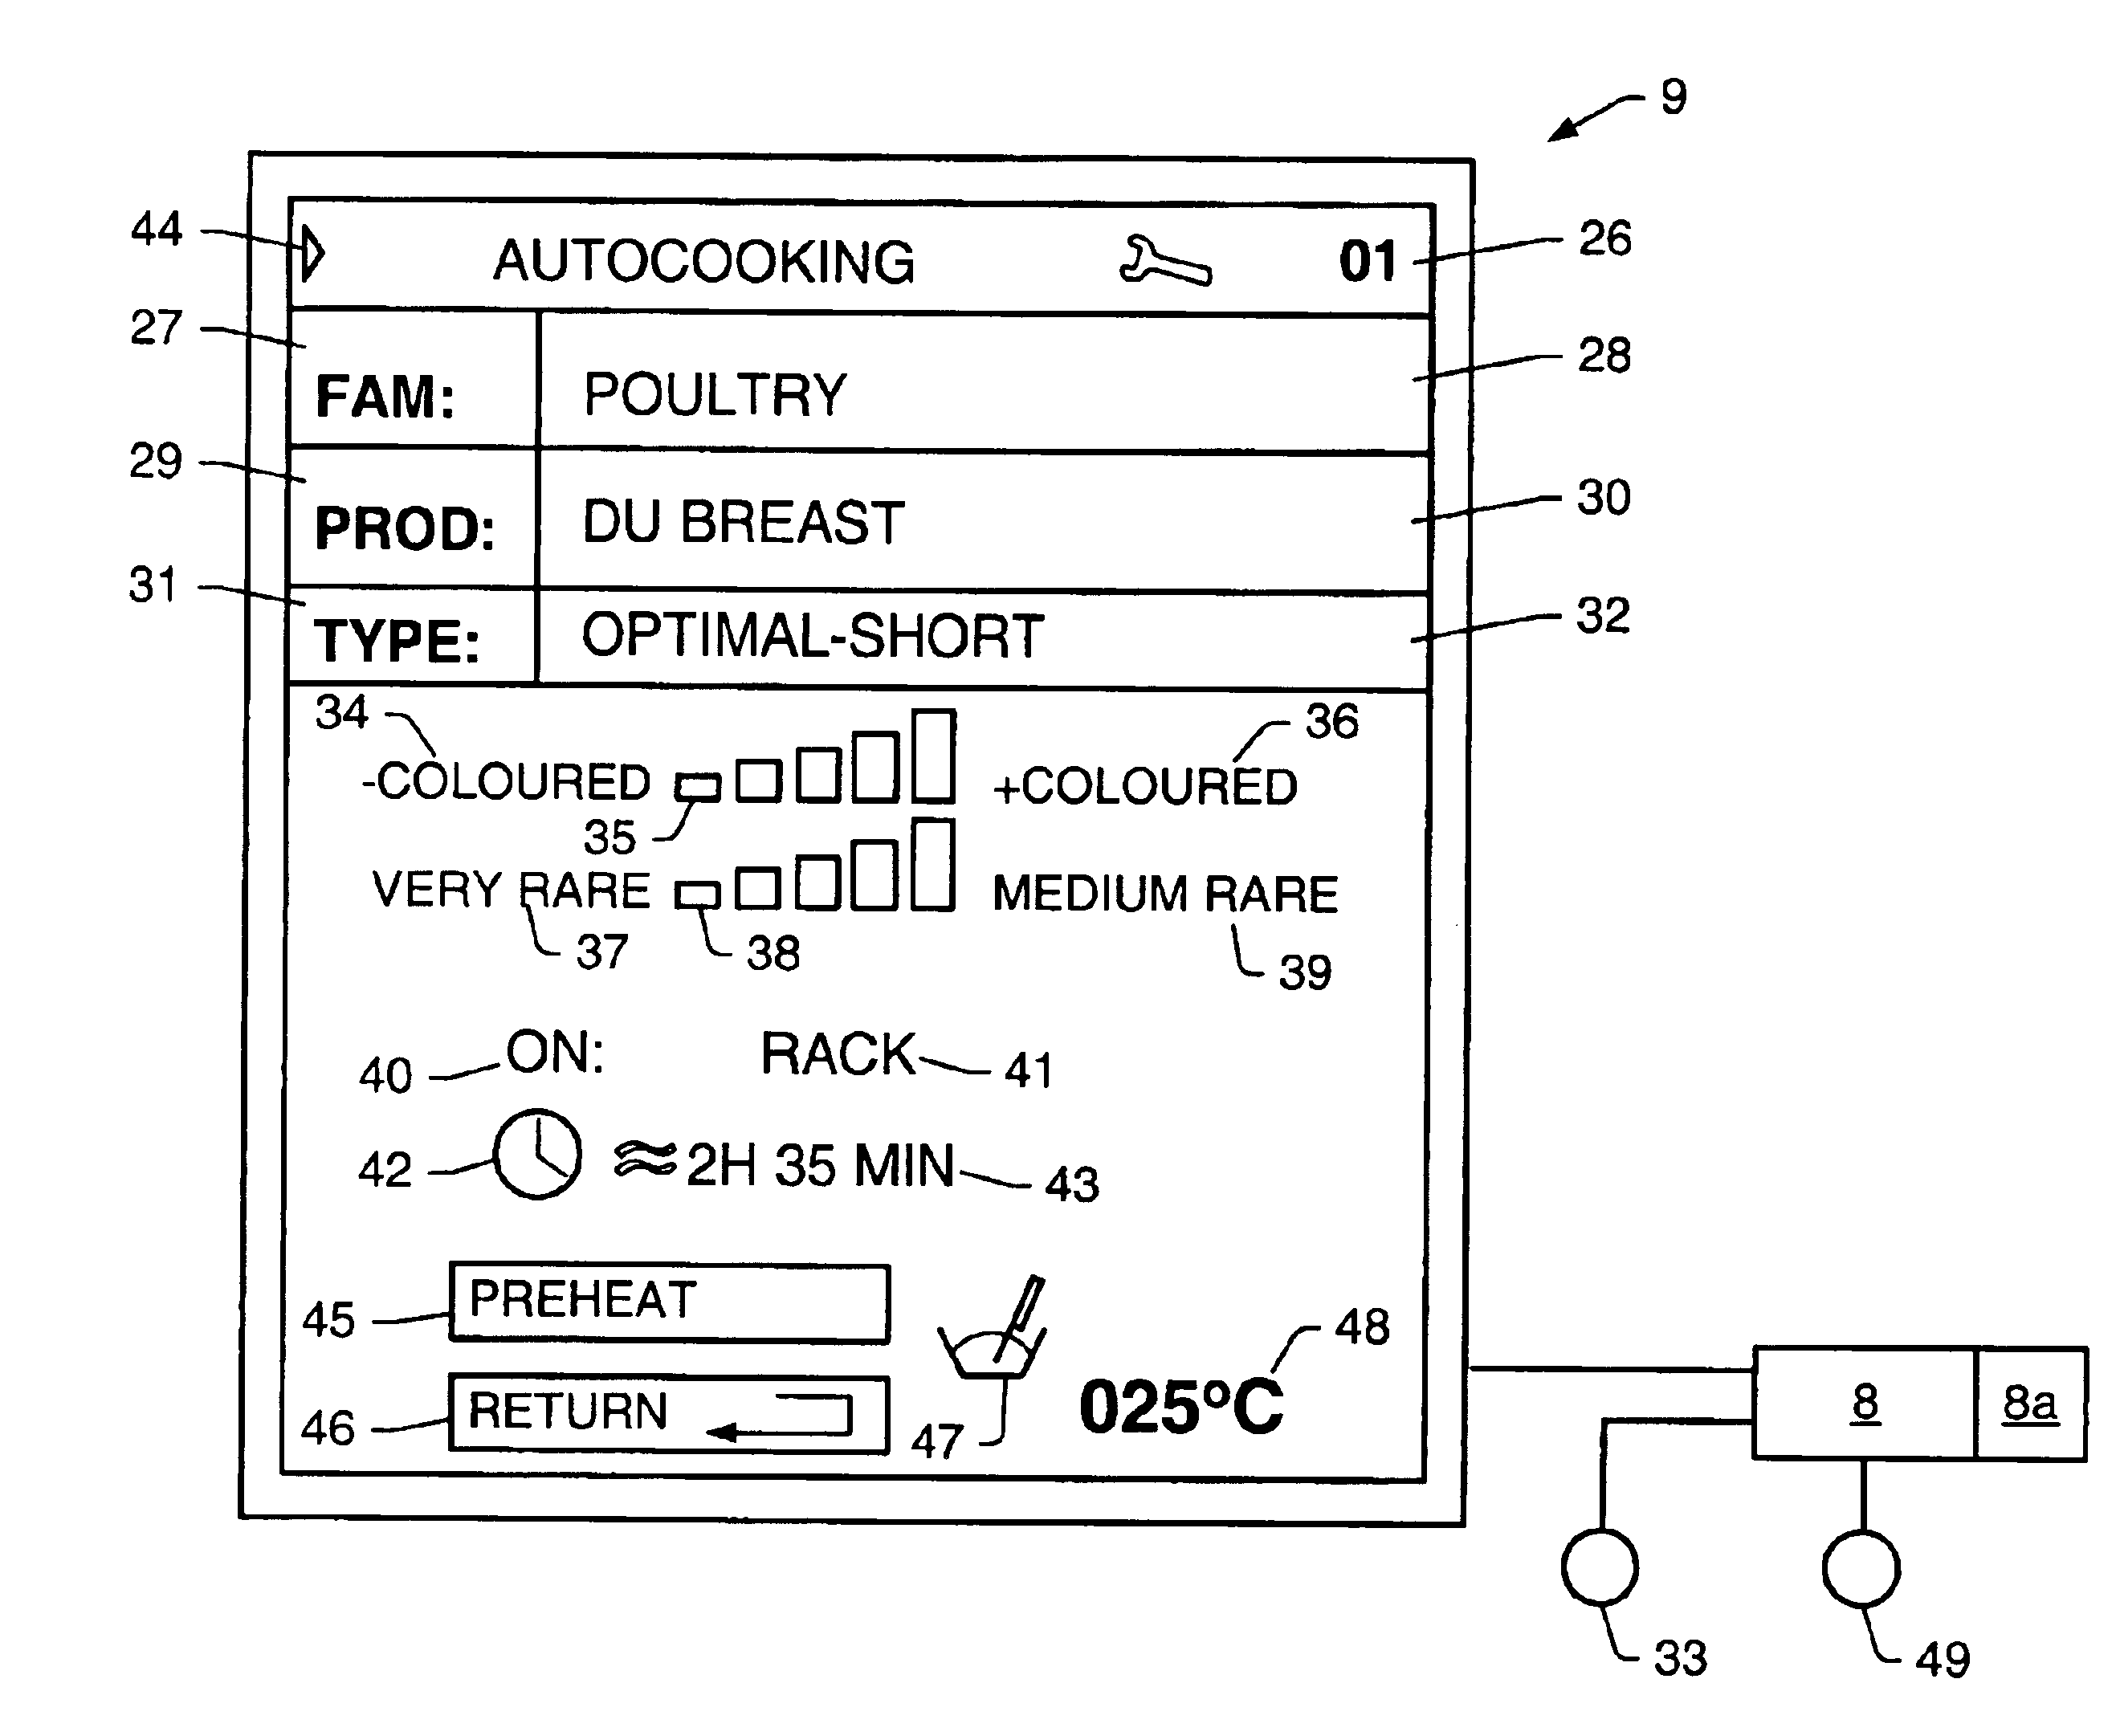 Oven control system